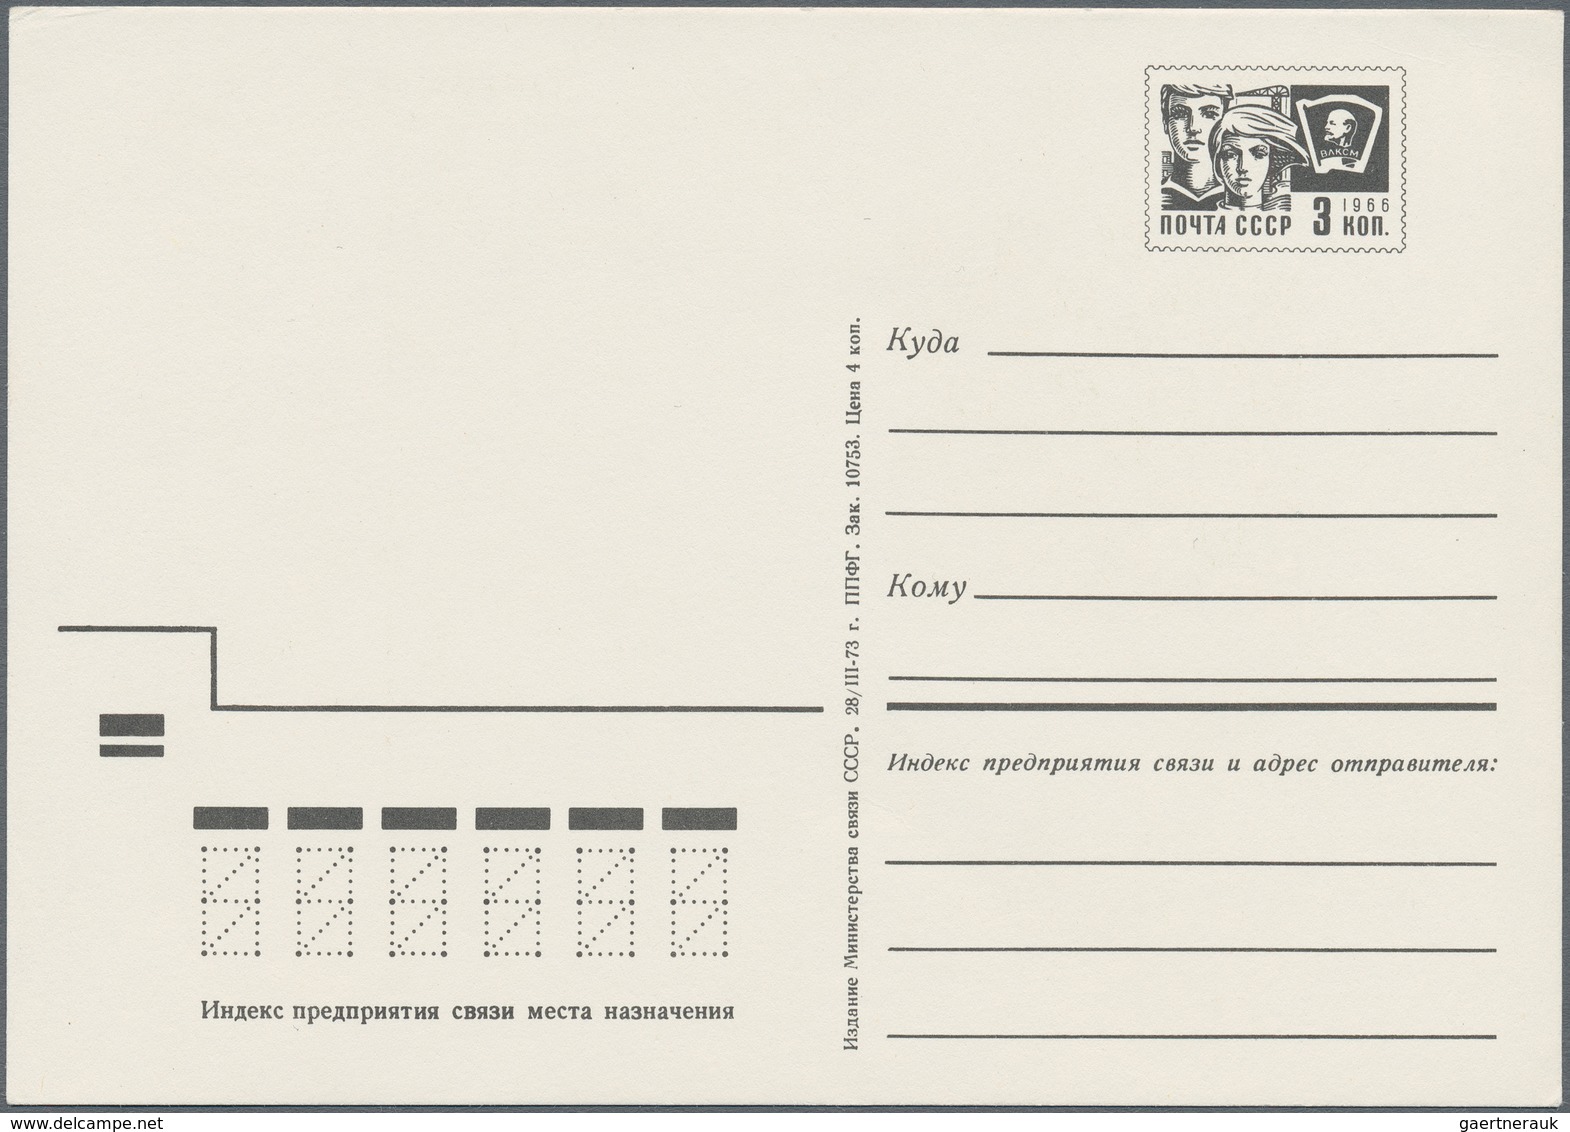 Sowjetunion: 1961/89 Ca. 56 Mostly Unused Postal Stationeries, Pictured Postal Stationery Cards And - Usados